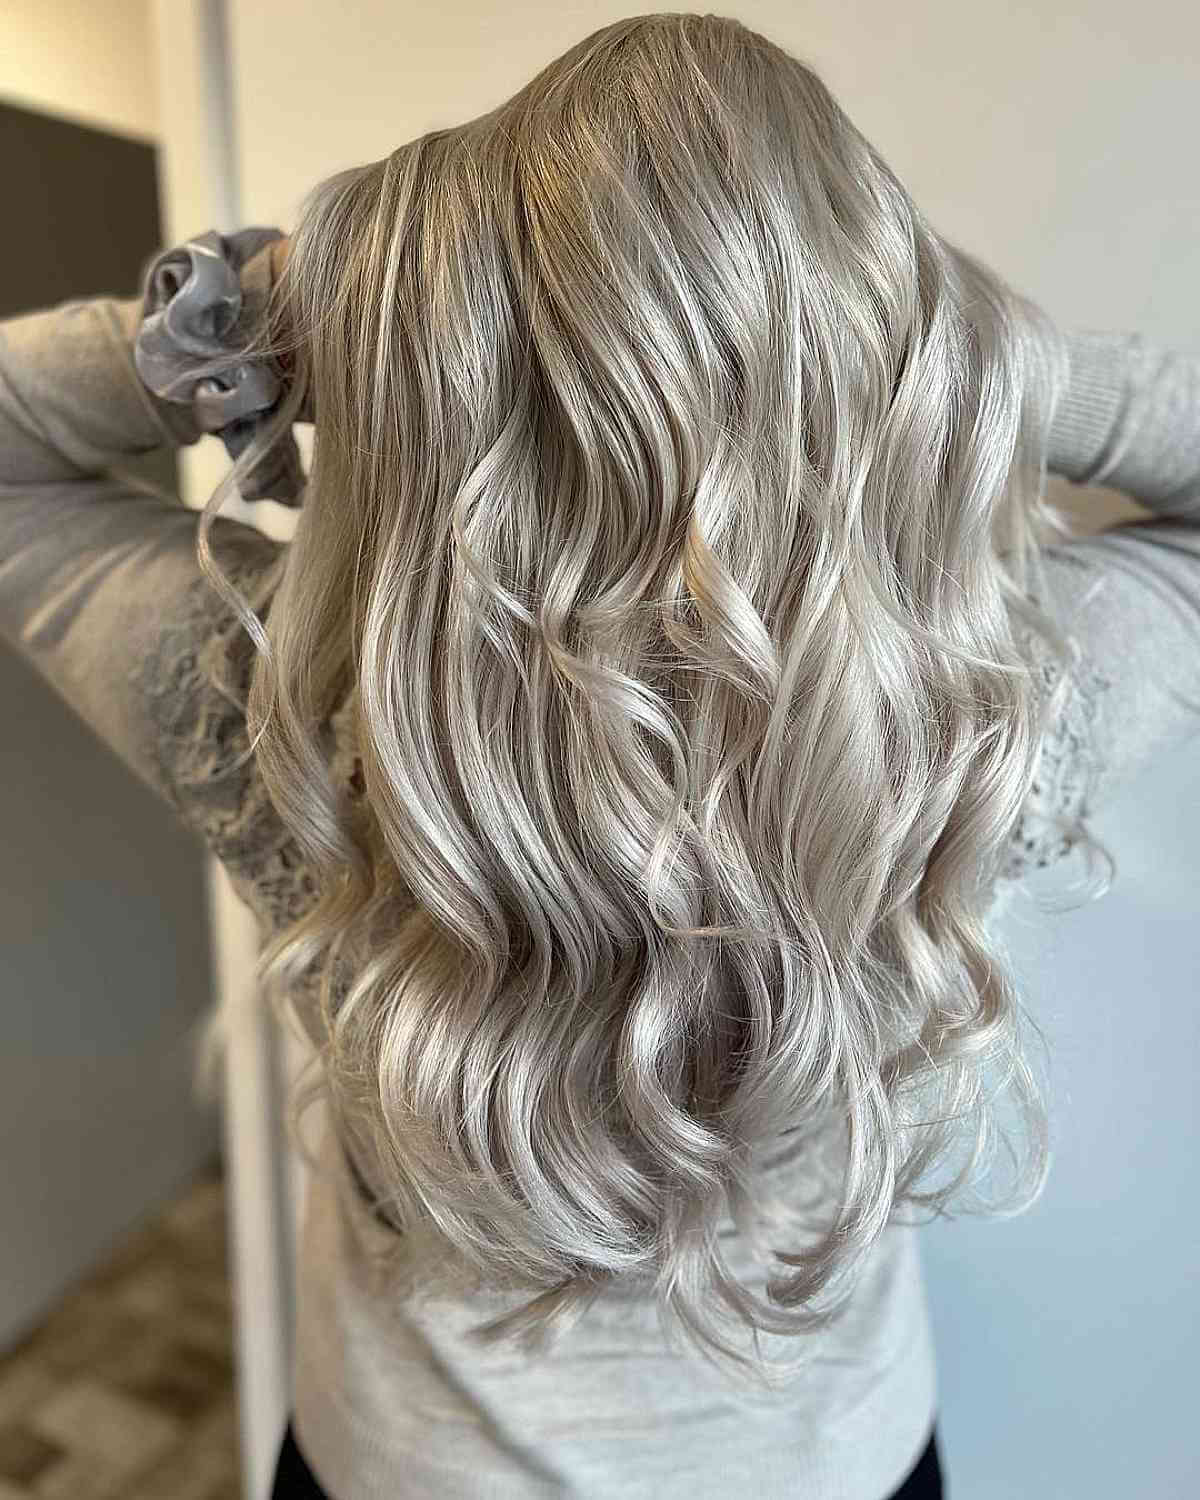 Metallic Silver and Blonde Hair Colors